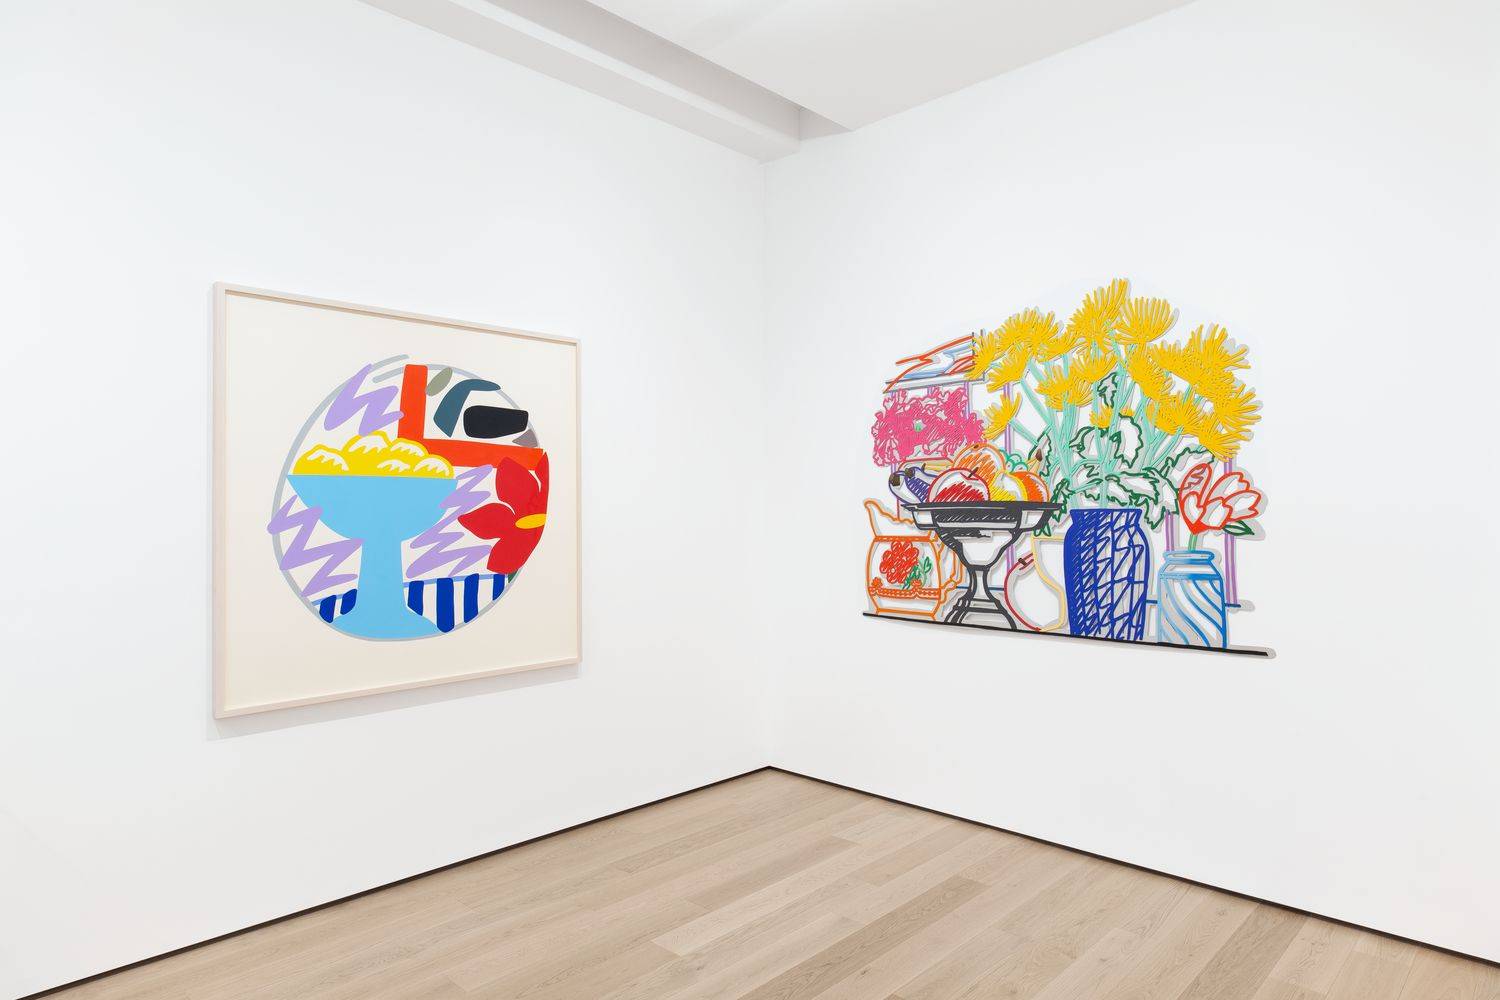 View of the exhibition ‘Still Life’ Almine Rech, Paris Matignon March 10 - April 10, 2021. Photo: Ana Drittanti. Courtesy of Almine Rech and © 2021 The Estate of Tom Wesselmann / Artists Rights Society (ARS), New York